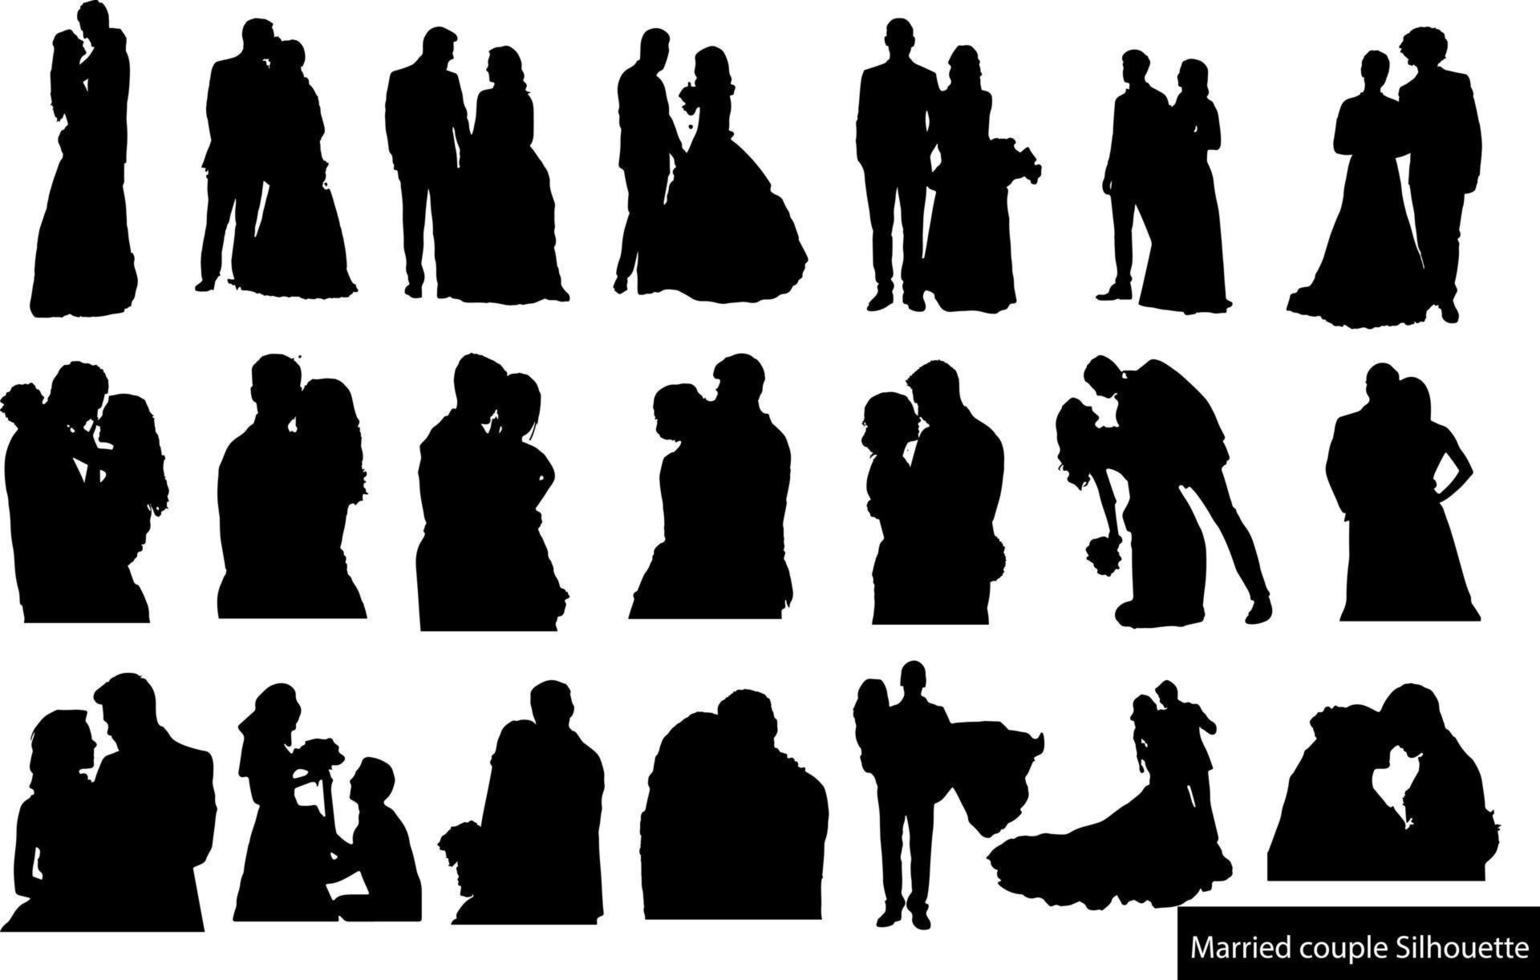 Couple silhouette vector, isolated, set of wedding silhouettes vector